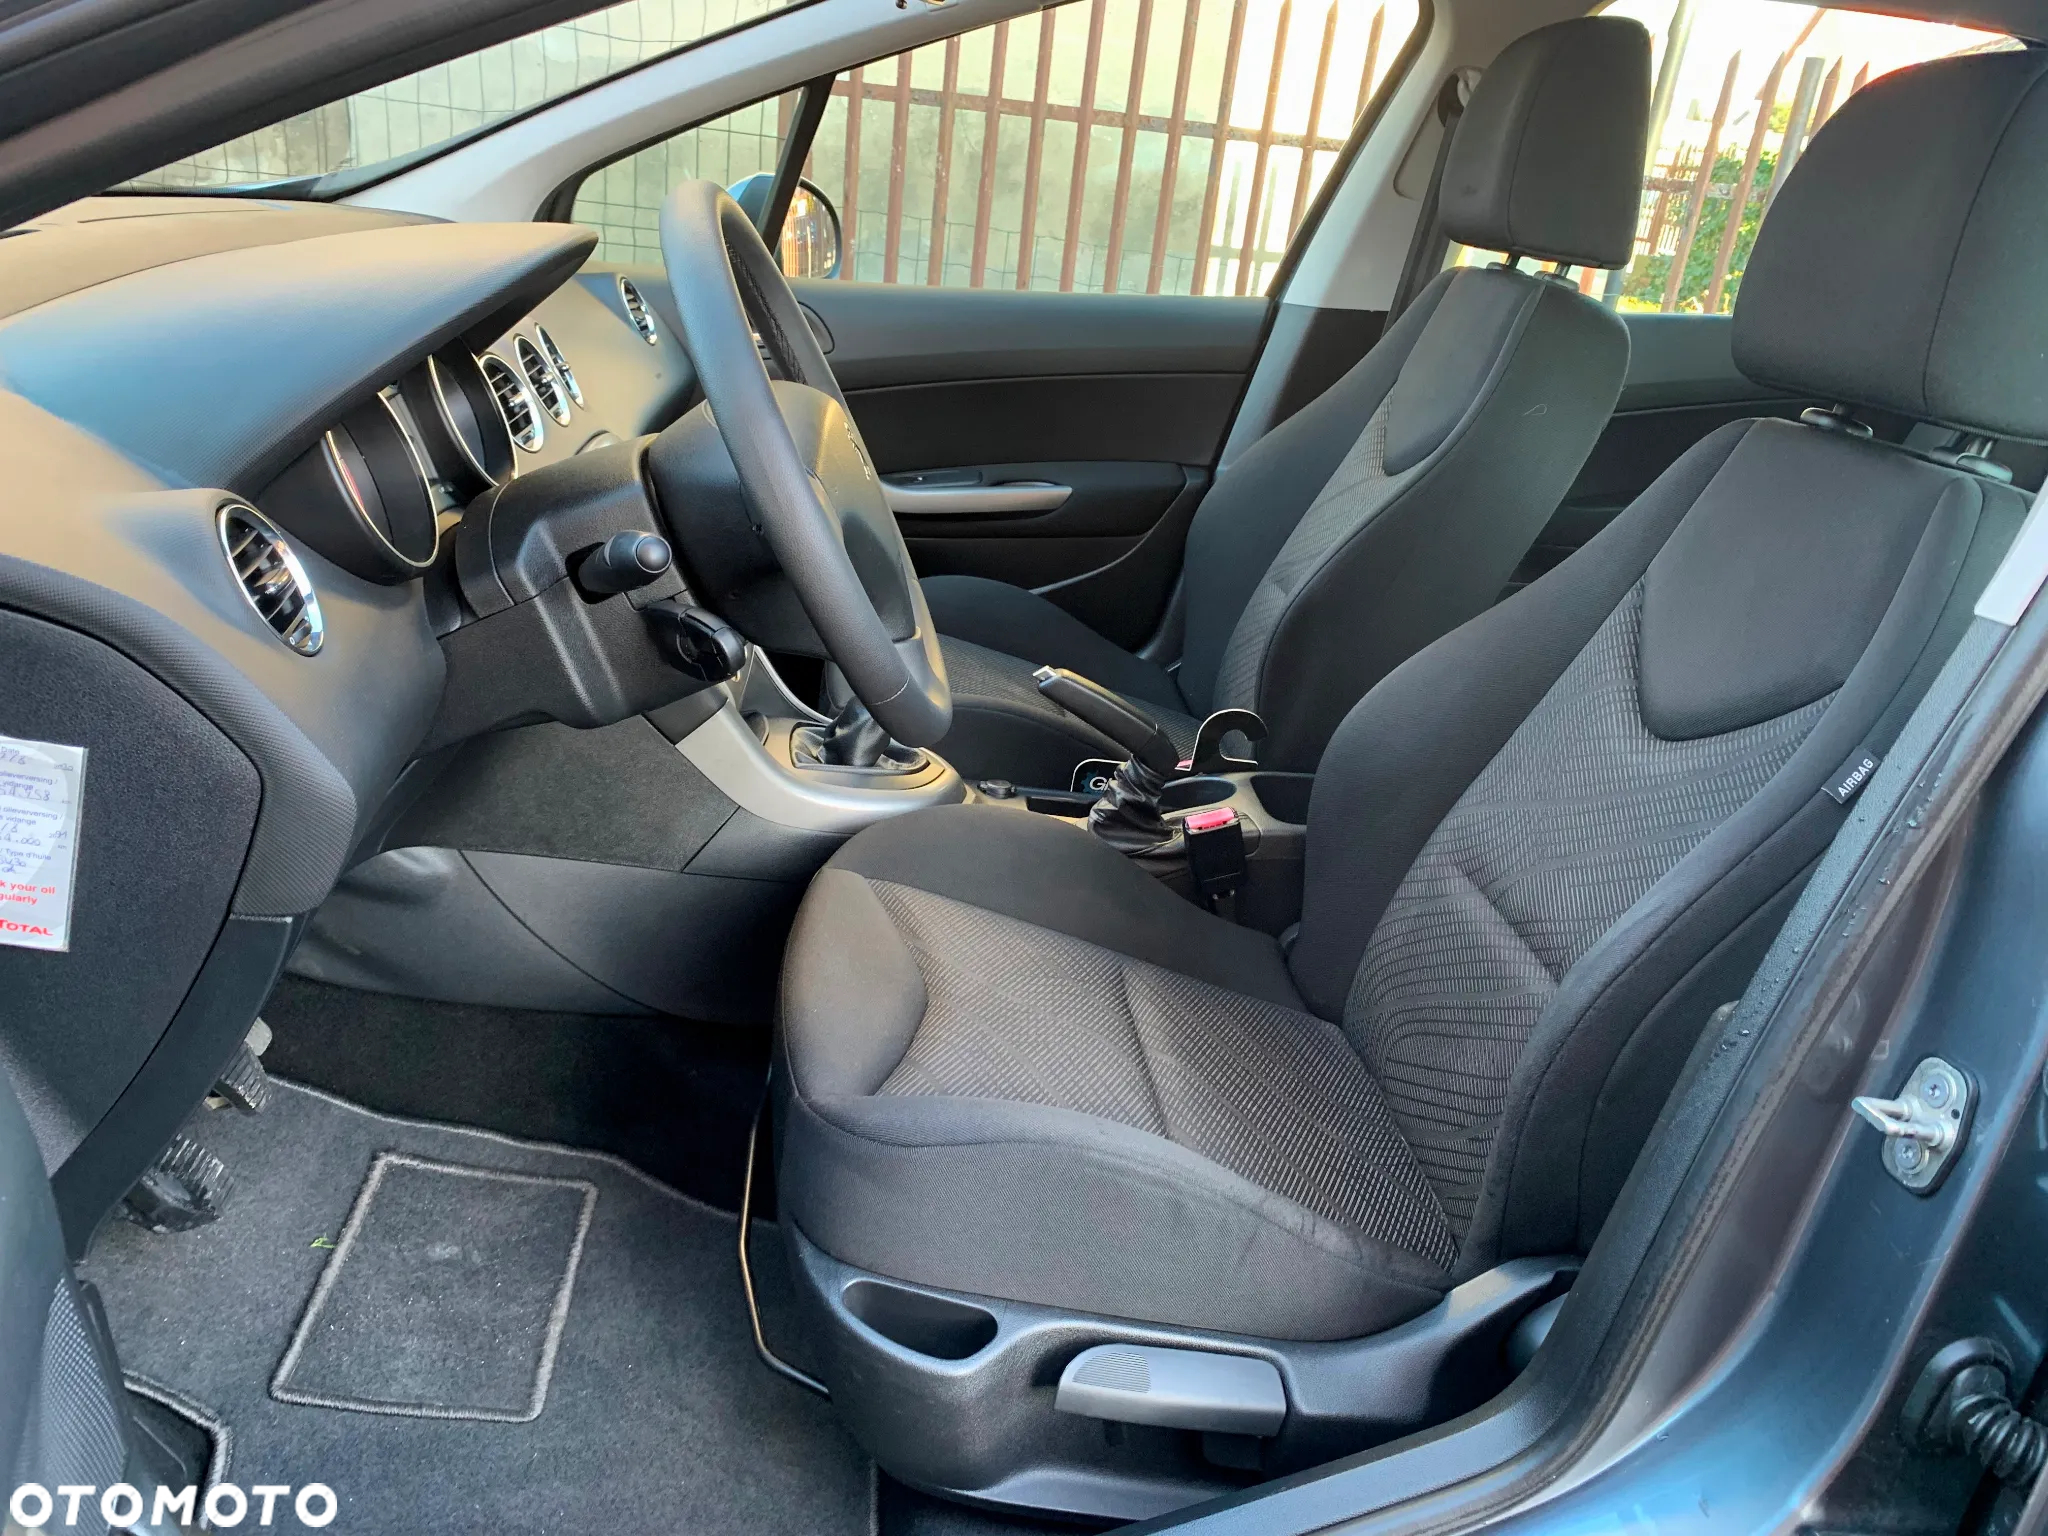 Peugeot 308 1.6 HDi Active - 3